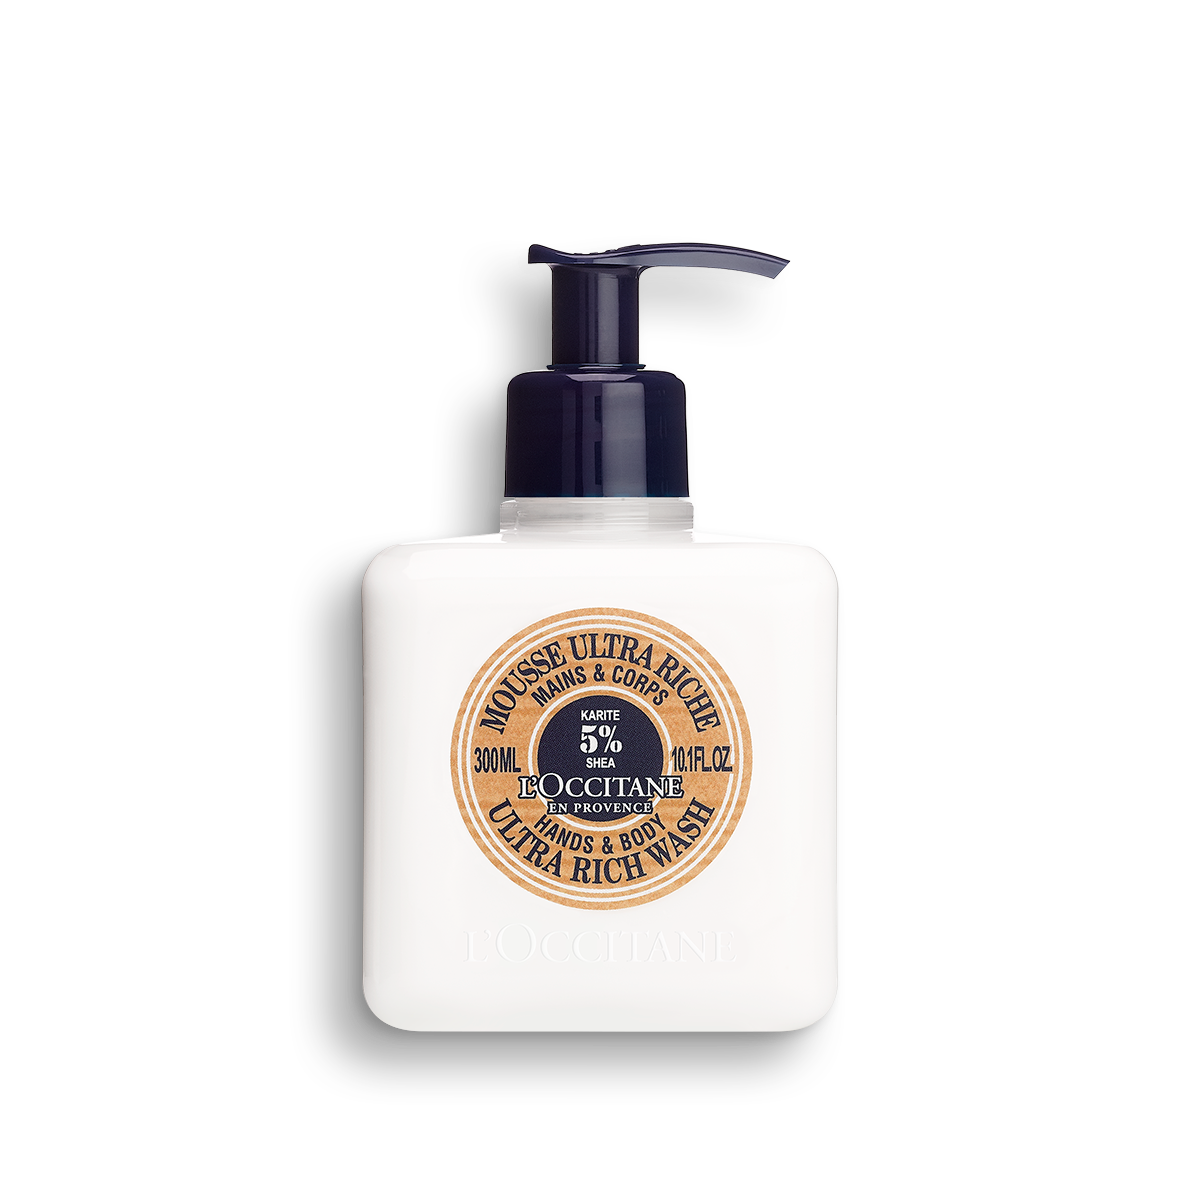 Best Selling Shopify Products on pe.loccitane.com-3